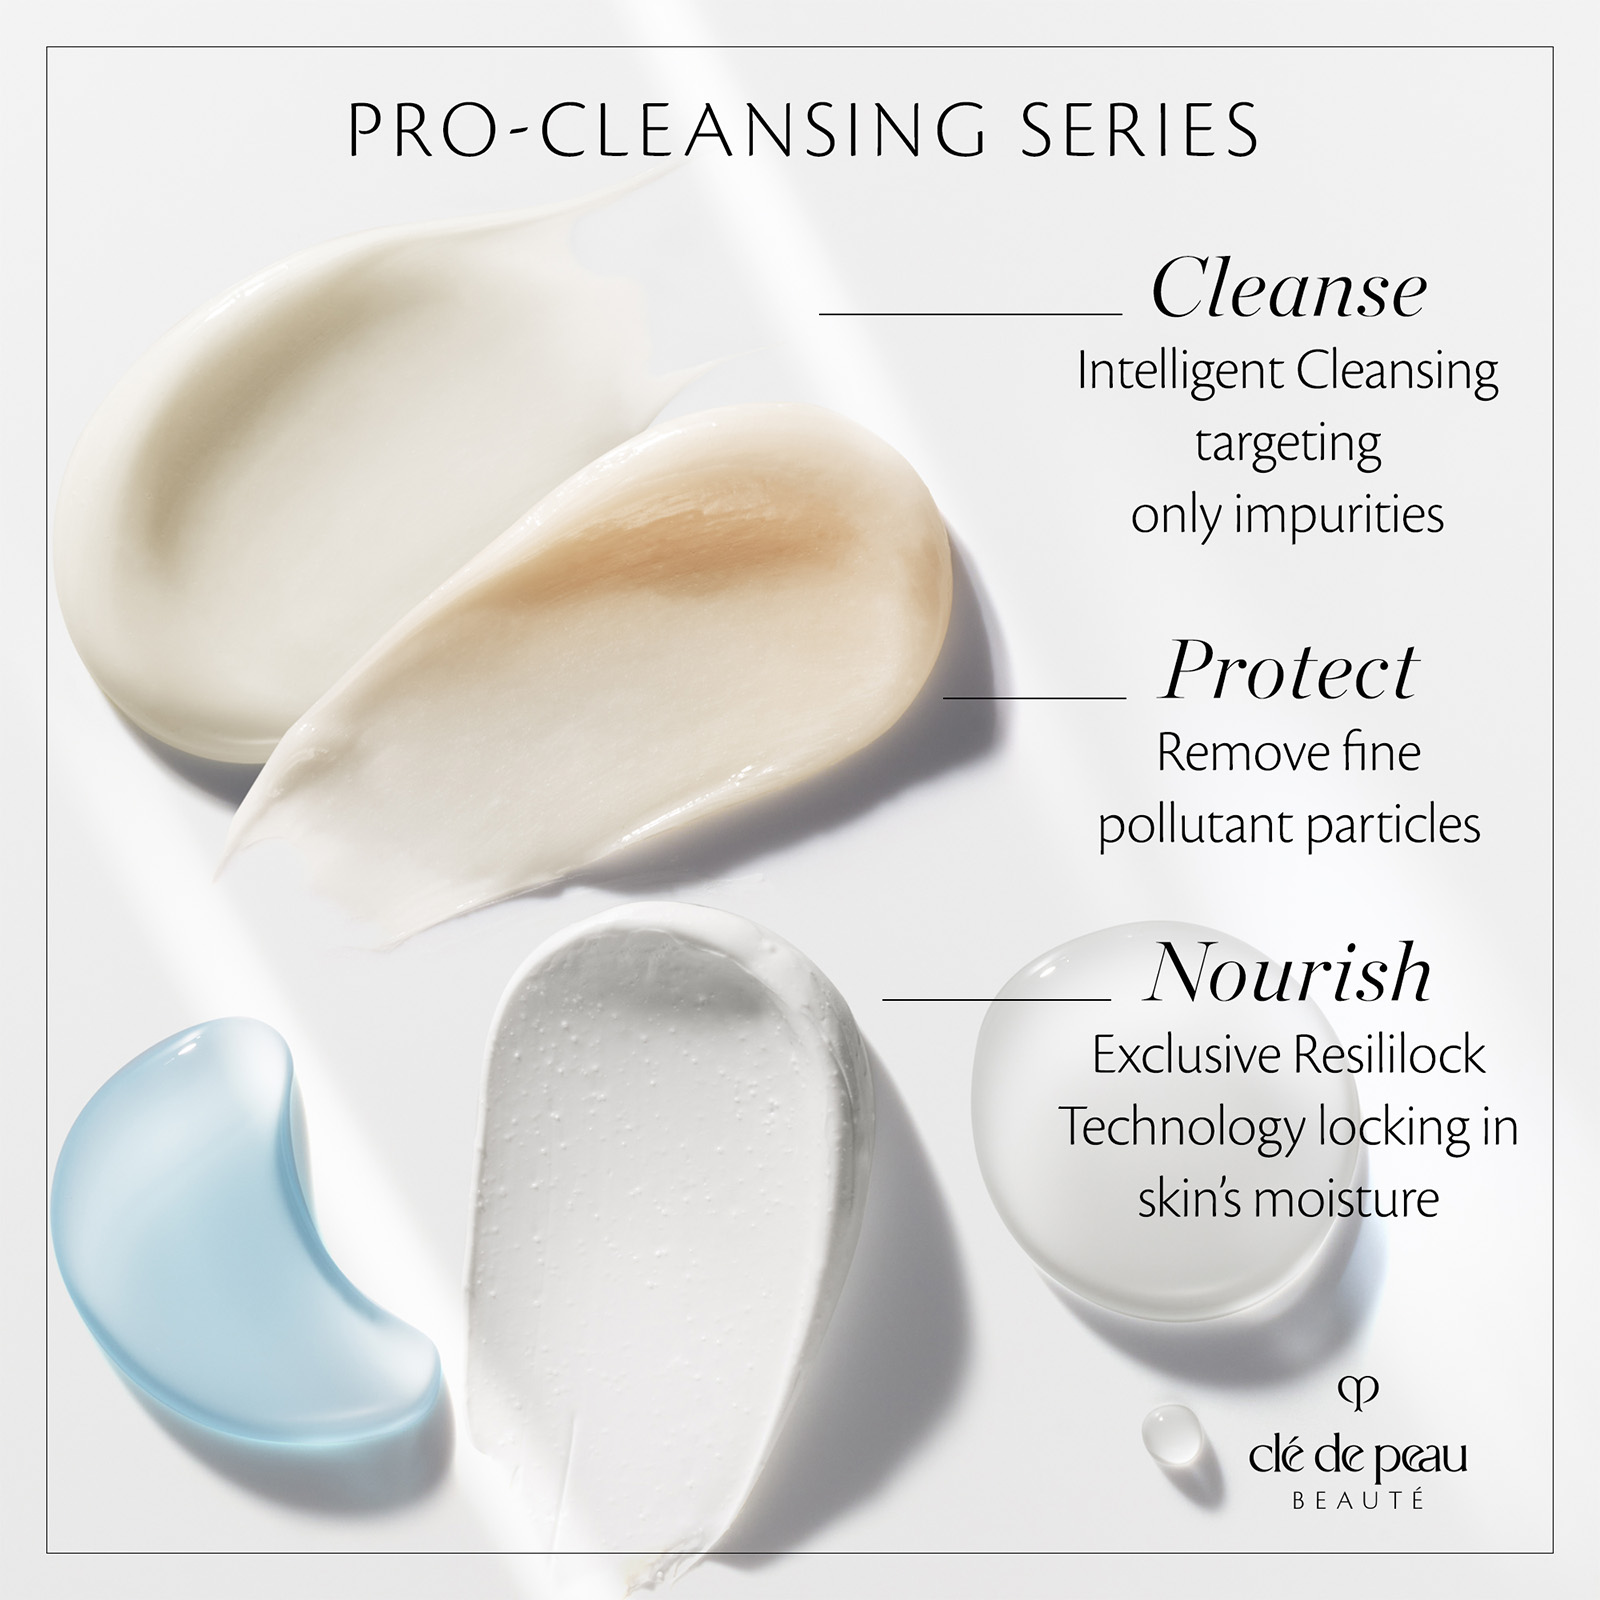 Pro-Cleansing Series